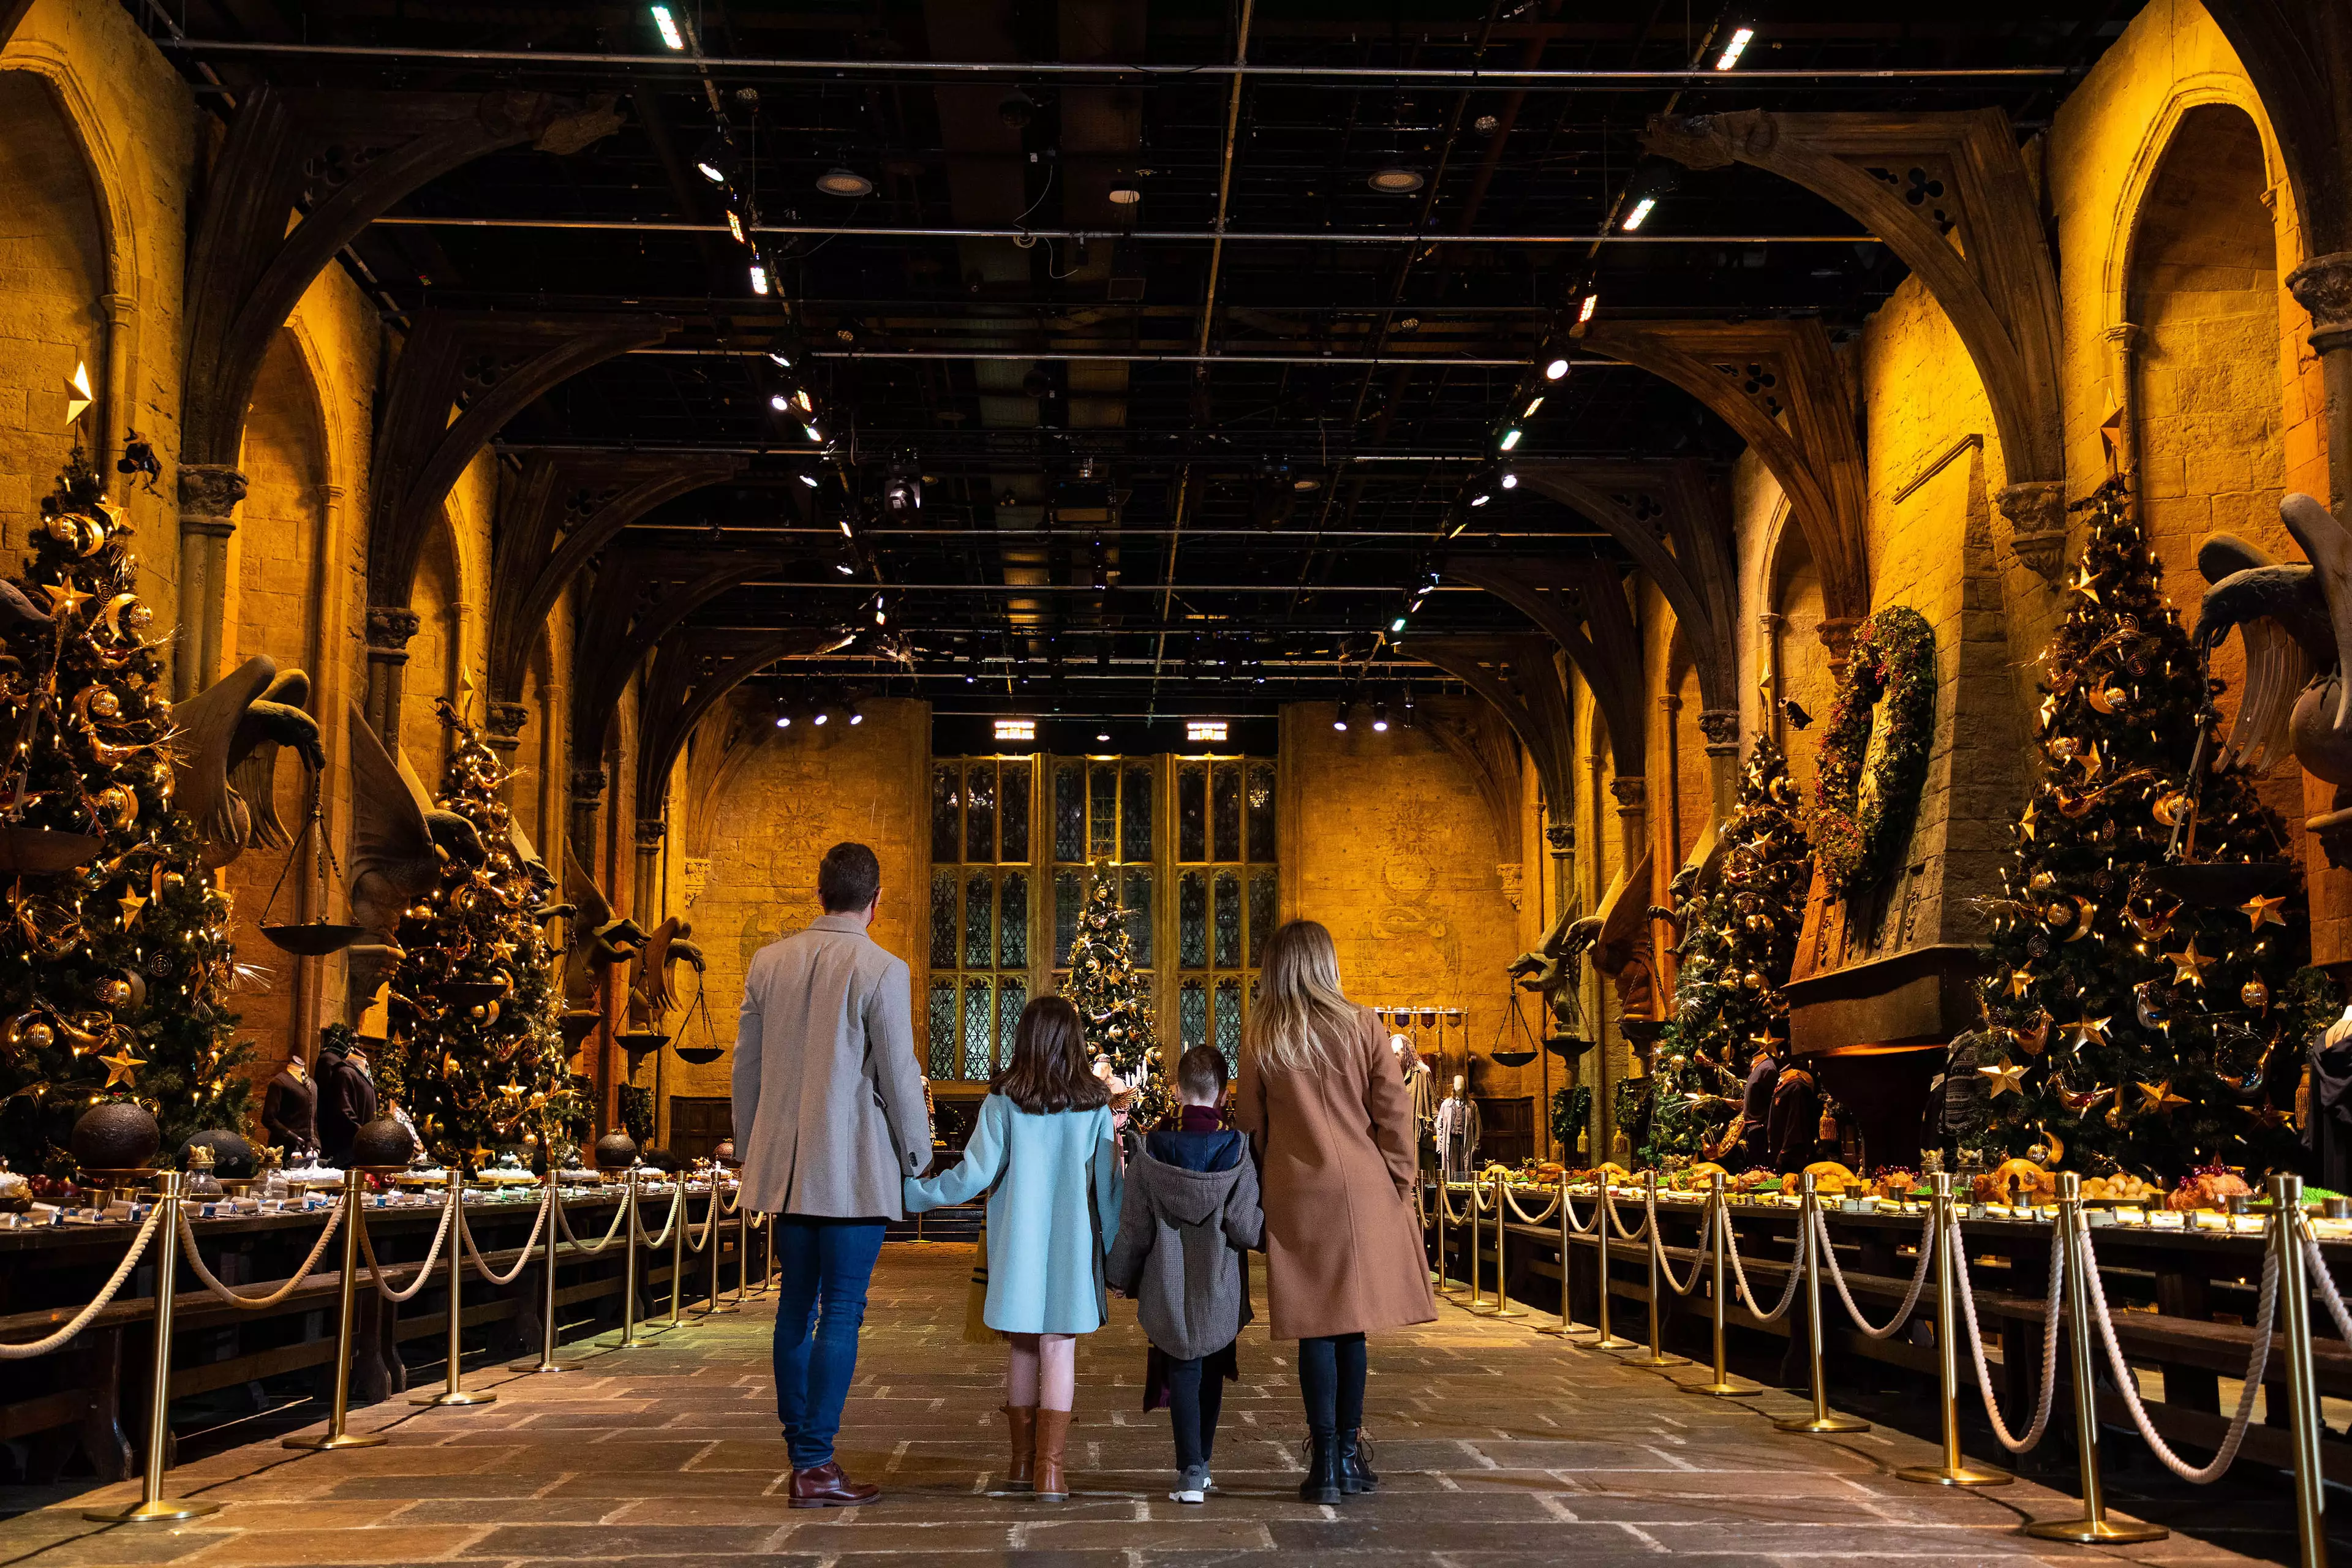 Other parts of Hogwarts have been kitted out for winter (